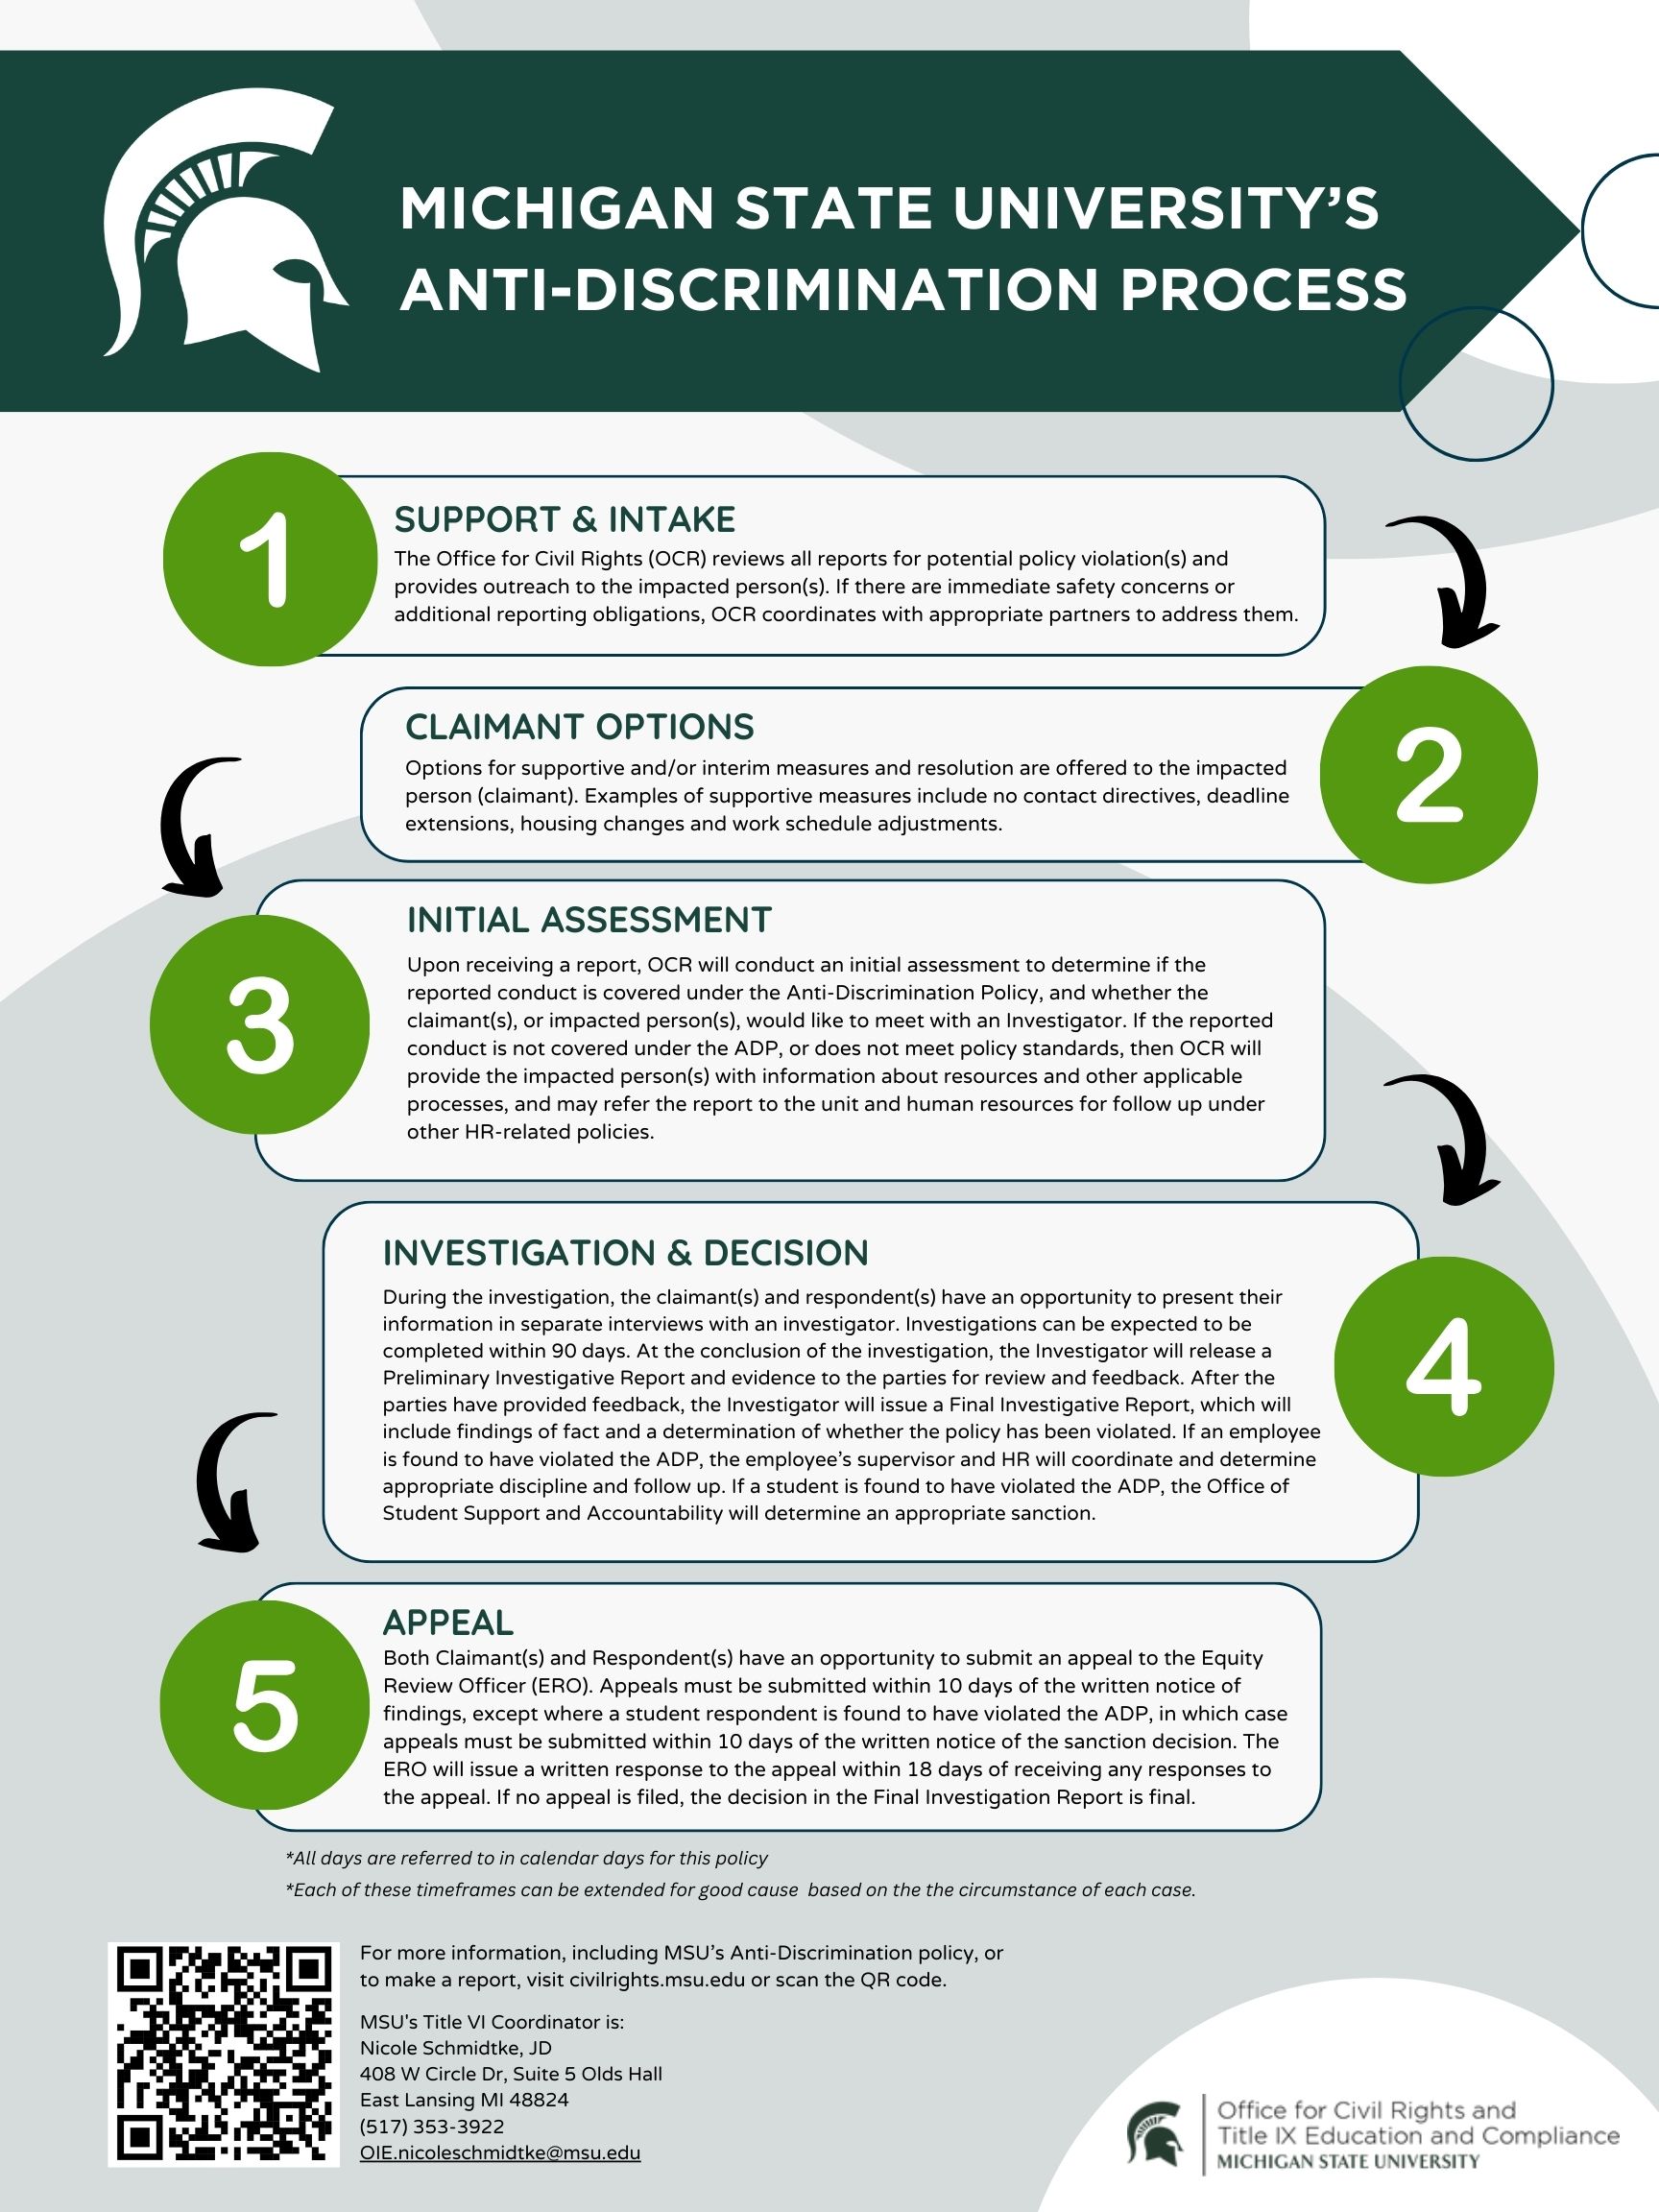 MSU ADP process infographic. Accessible version available for download.